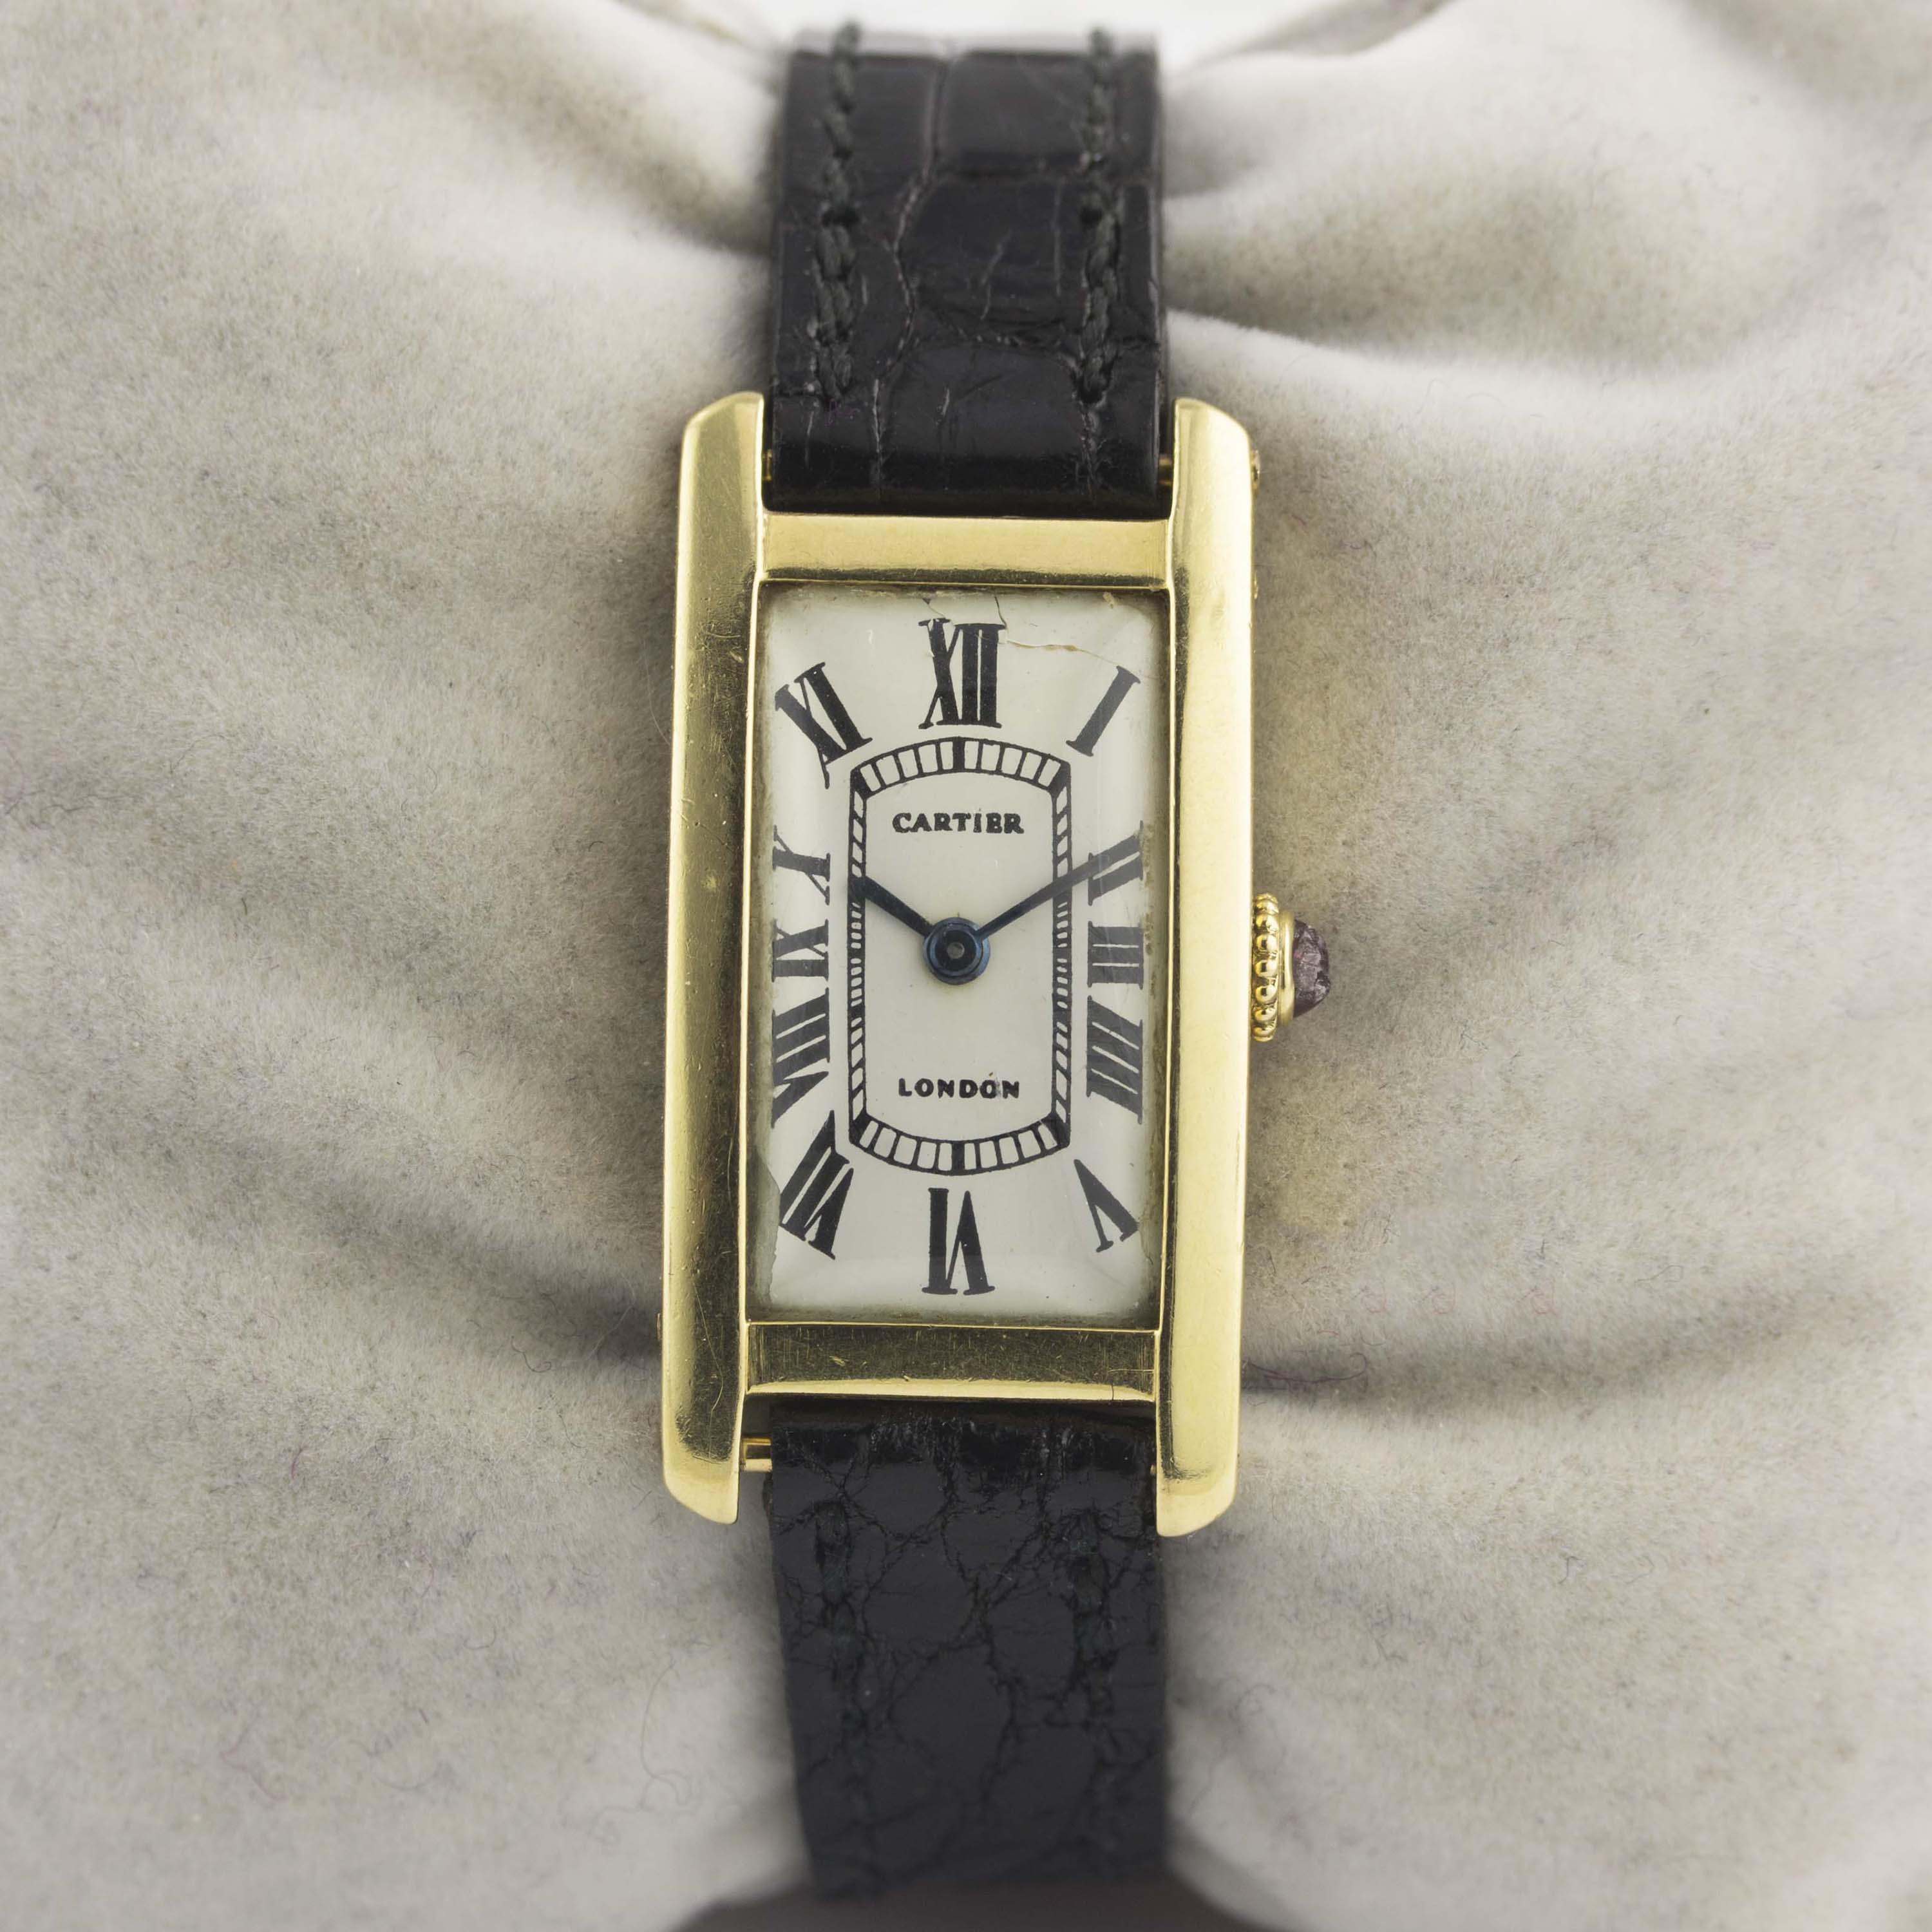 A VERY RARE 18K SOLID GOLD CARTIER LONDON TANK RECTANGULAR WRIST WATCH CIRCA 1969, WITH LONDON - Image 3 of 11